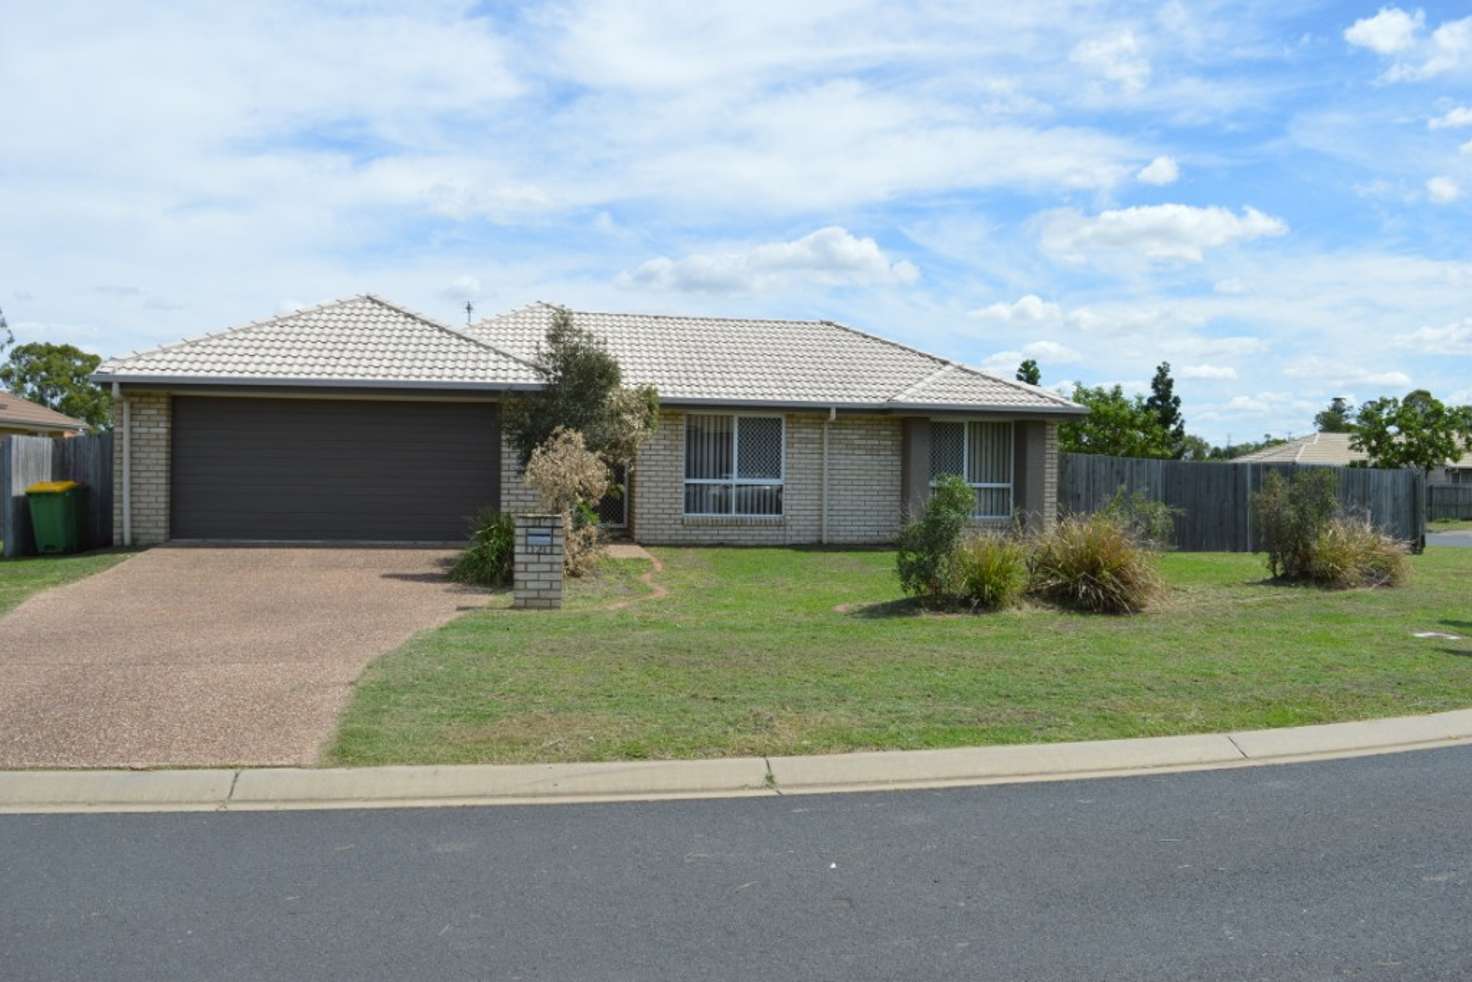 Main view of Homely house listing, 121 Douglas Mcinnes Dr, Laidley QLD 4341